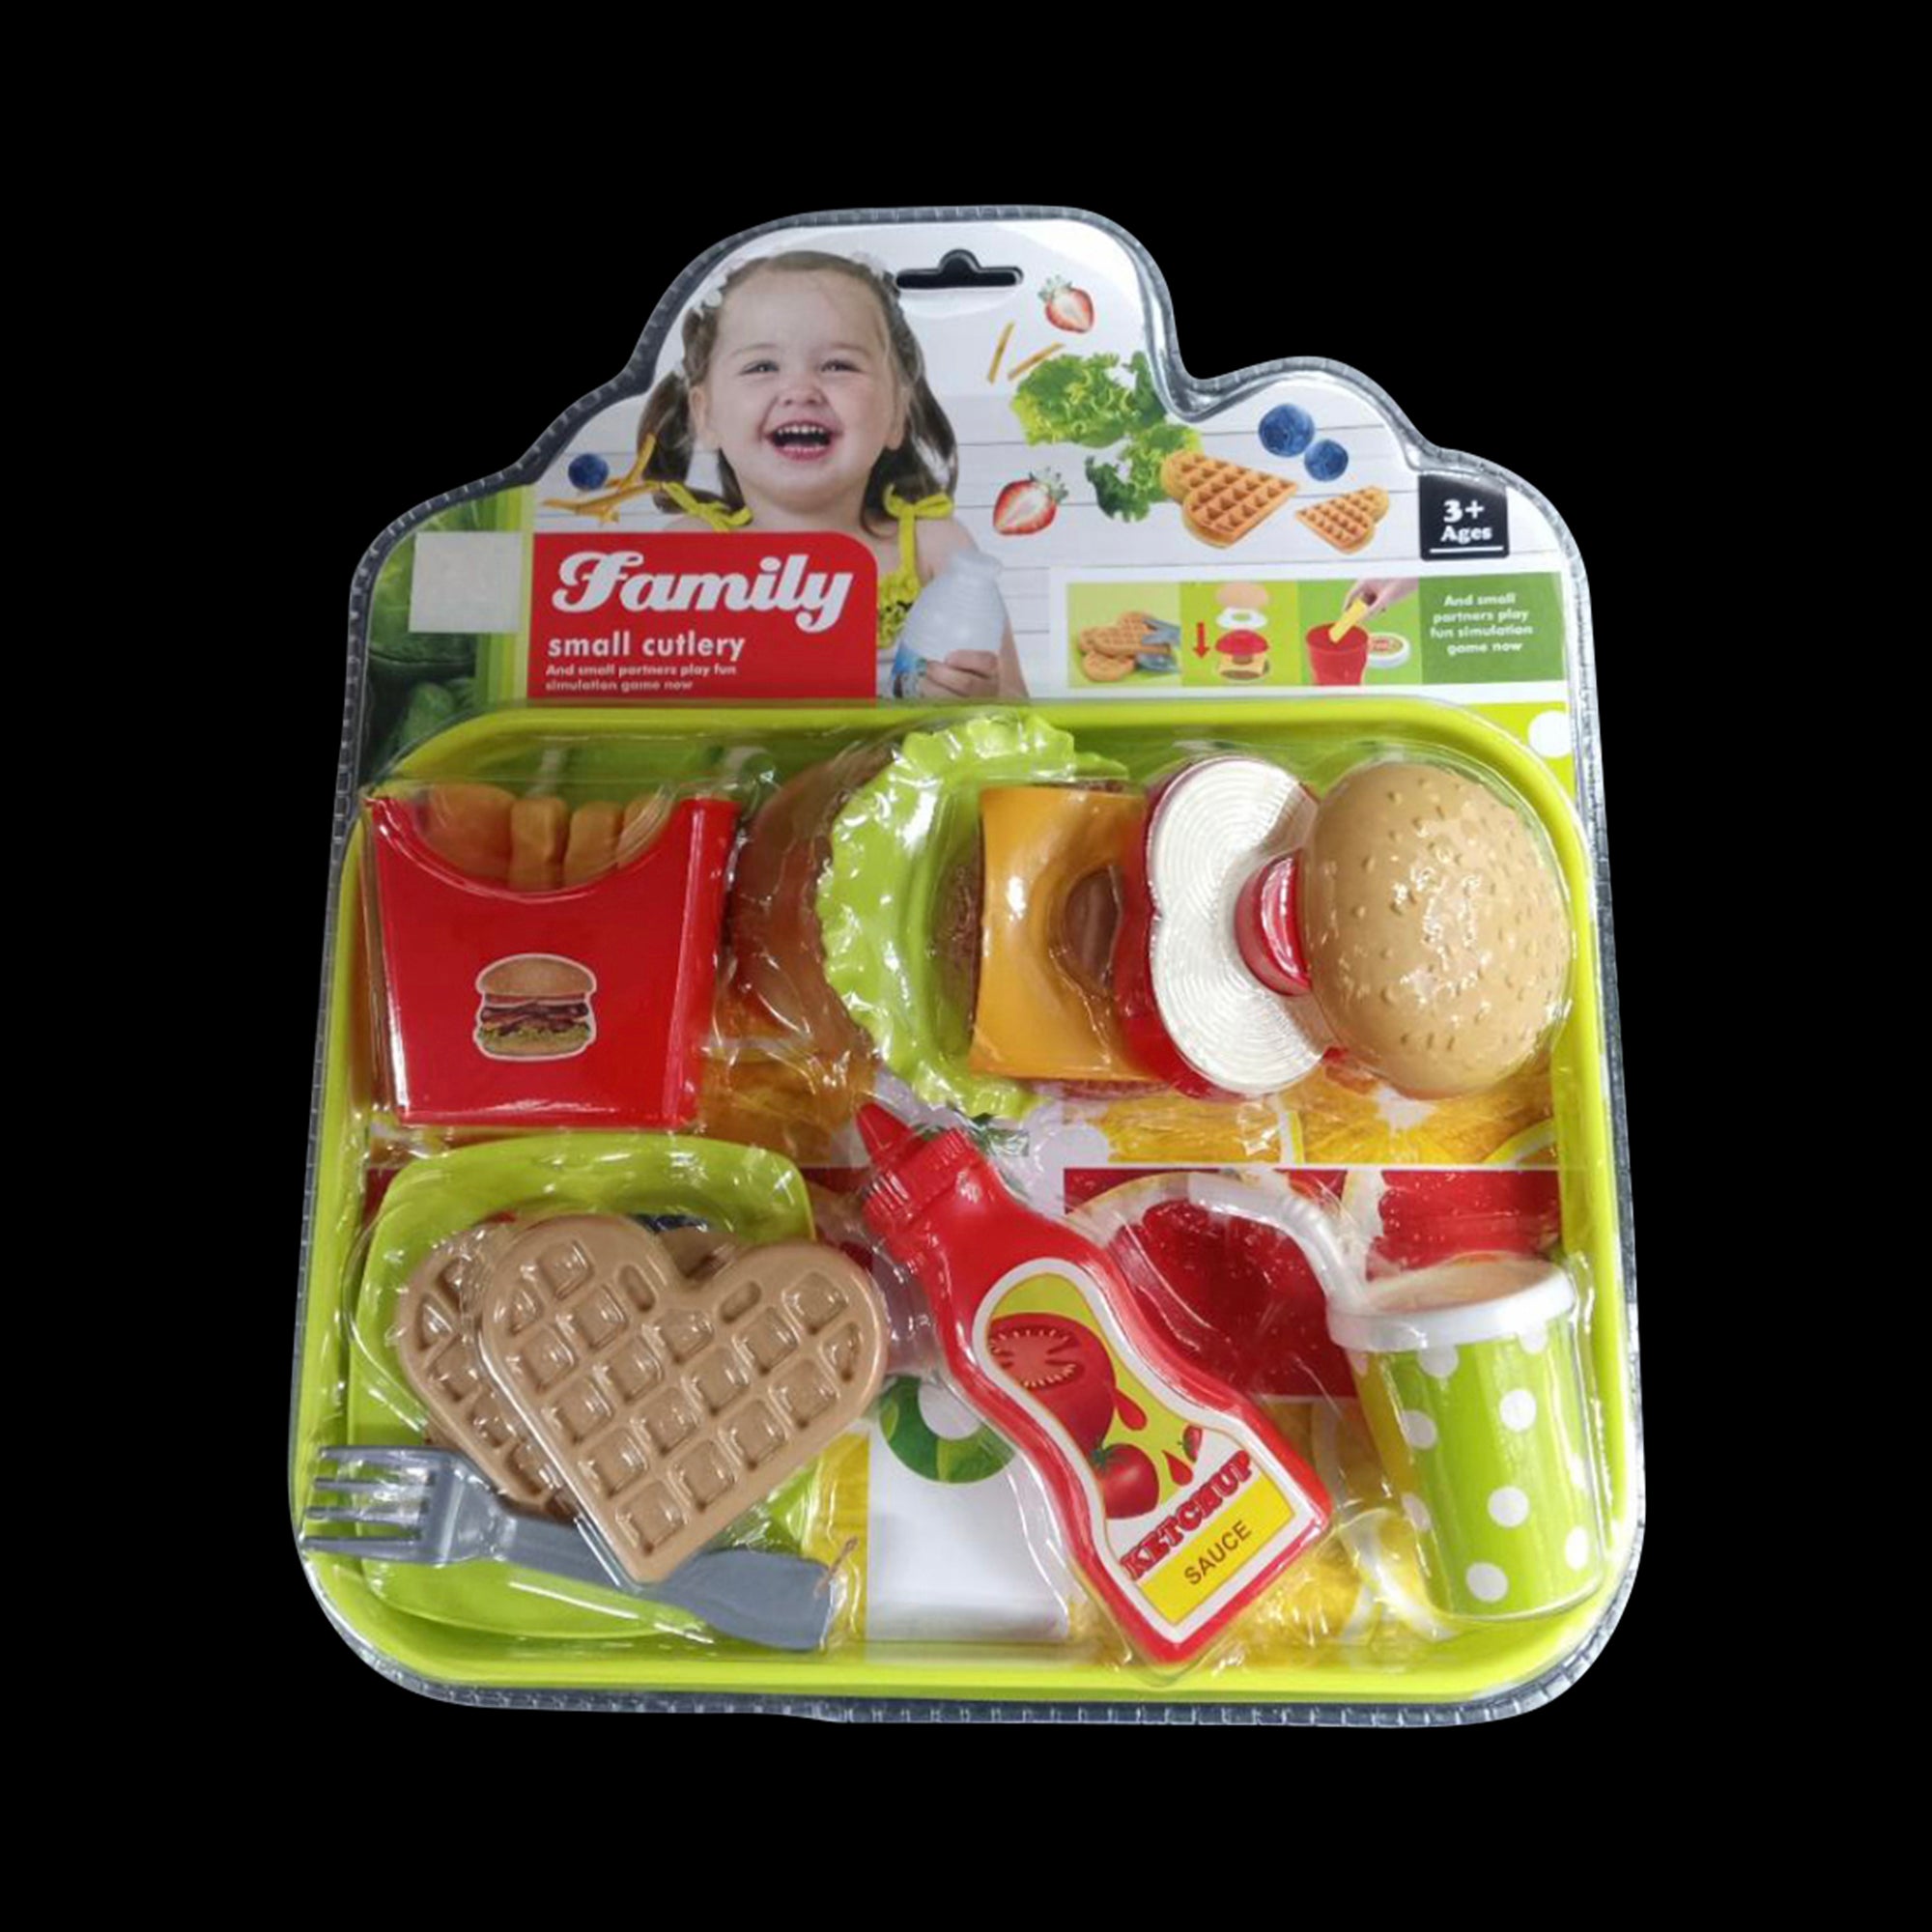 Family Small Cutler Meal set Toy